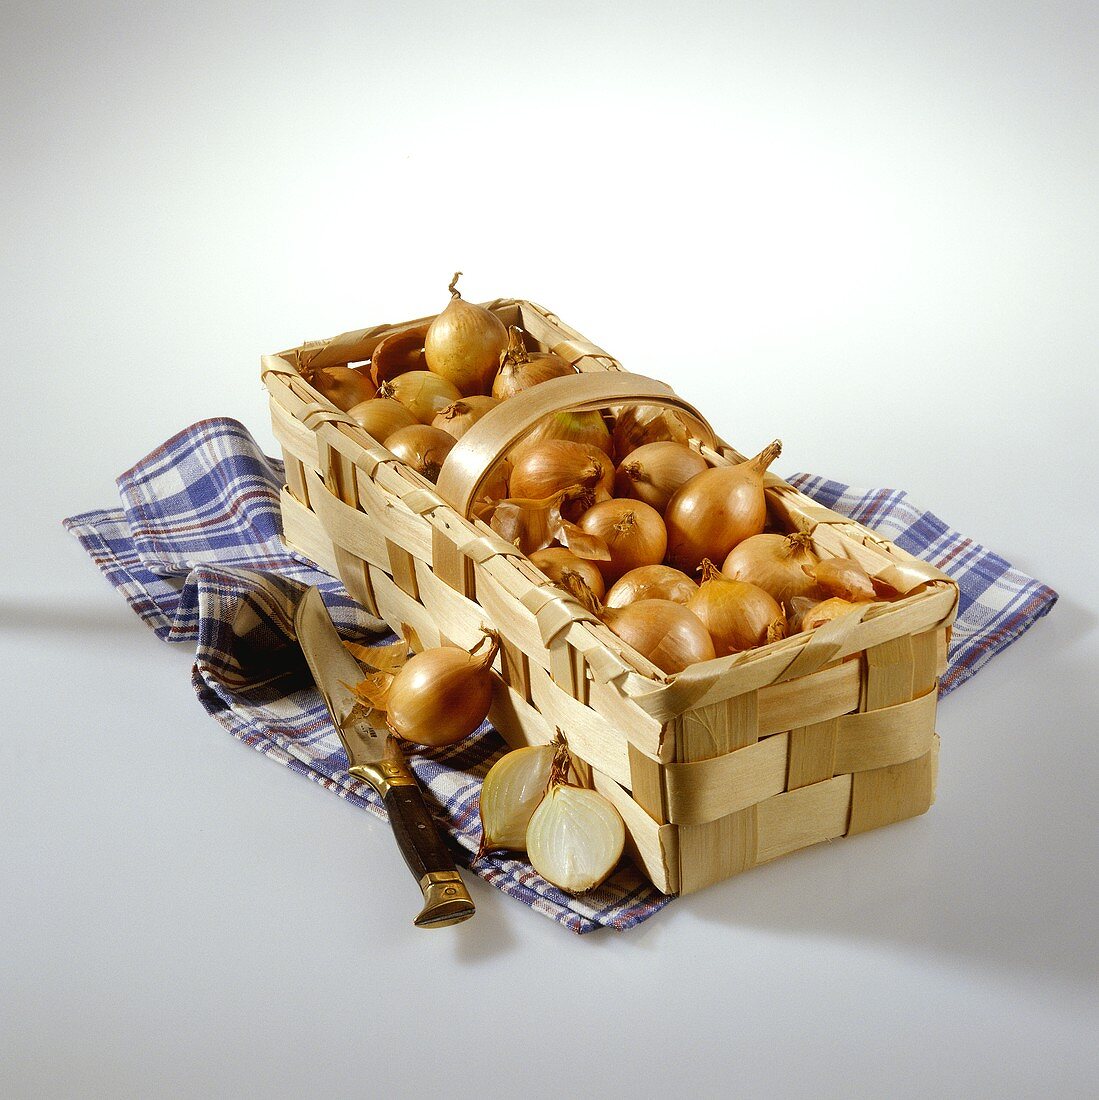 Onions in chip basket on blue checked cloth